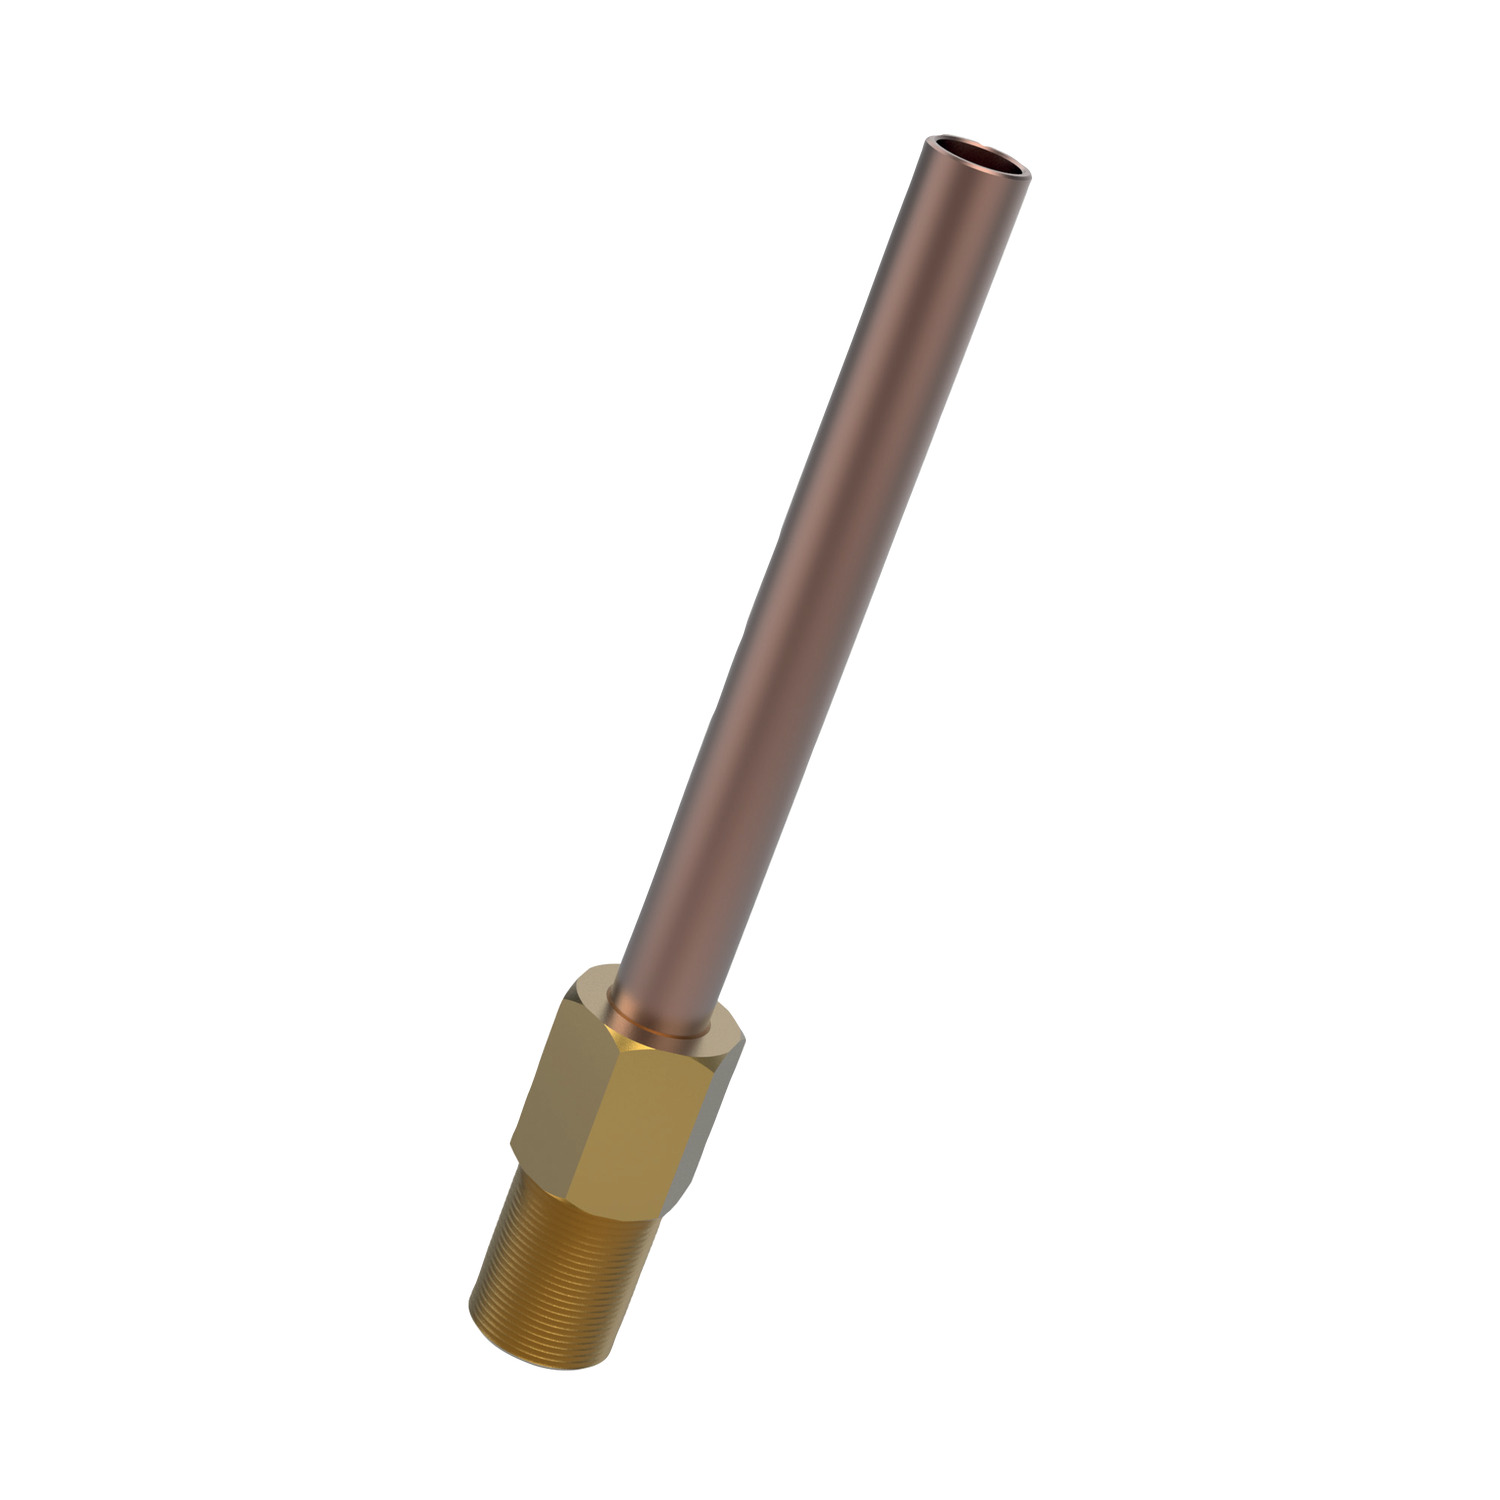 Extension Tube - For Coolant Nozzles Copper tube and threaded brass connector, simply bend and cut to length as required. Maximum pressure of 33 bars, temperature resistant to 150°C.